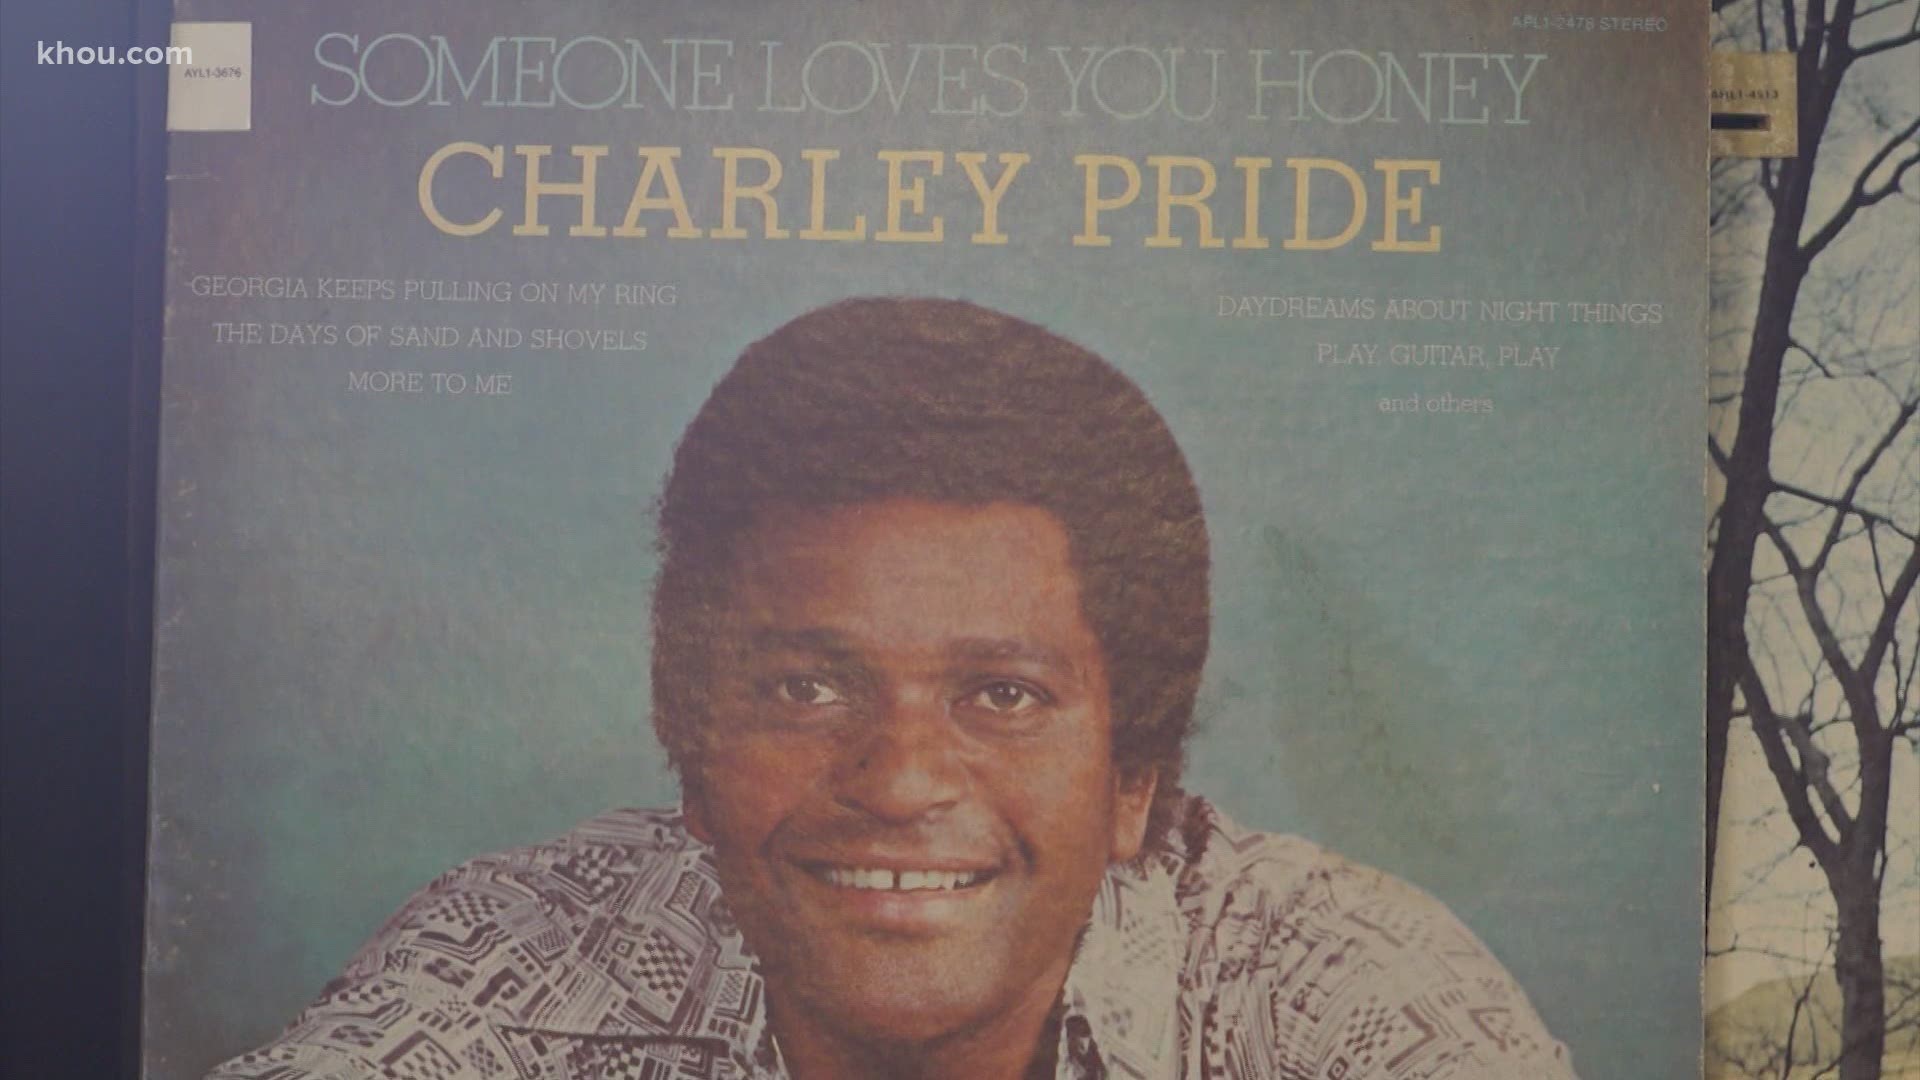 Who was Charley Pride? A trailblazer in the country music industry, all-time record holder for most Houston Livestock Show and Rodeo performance, and more.